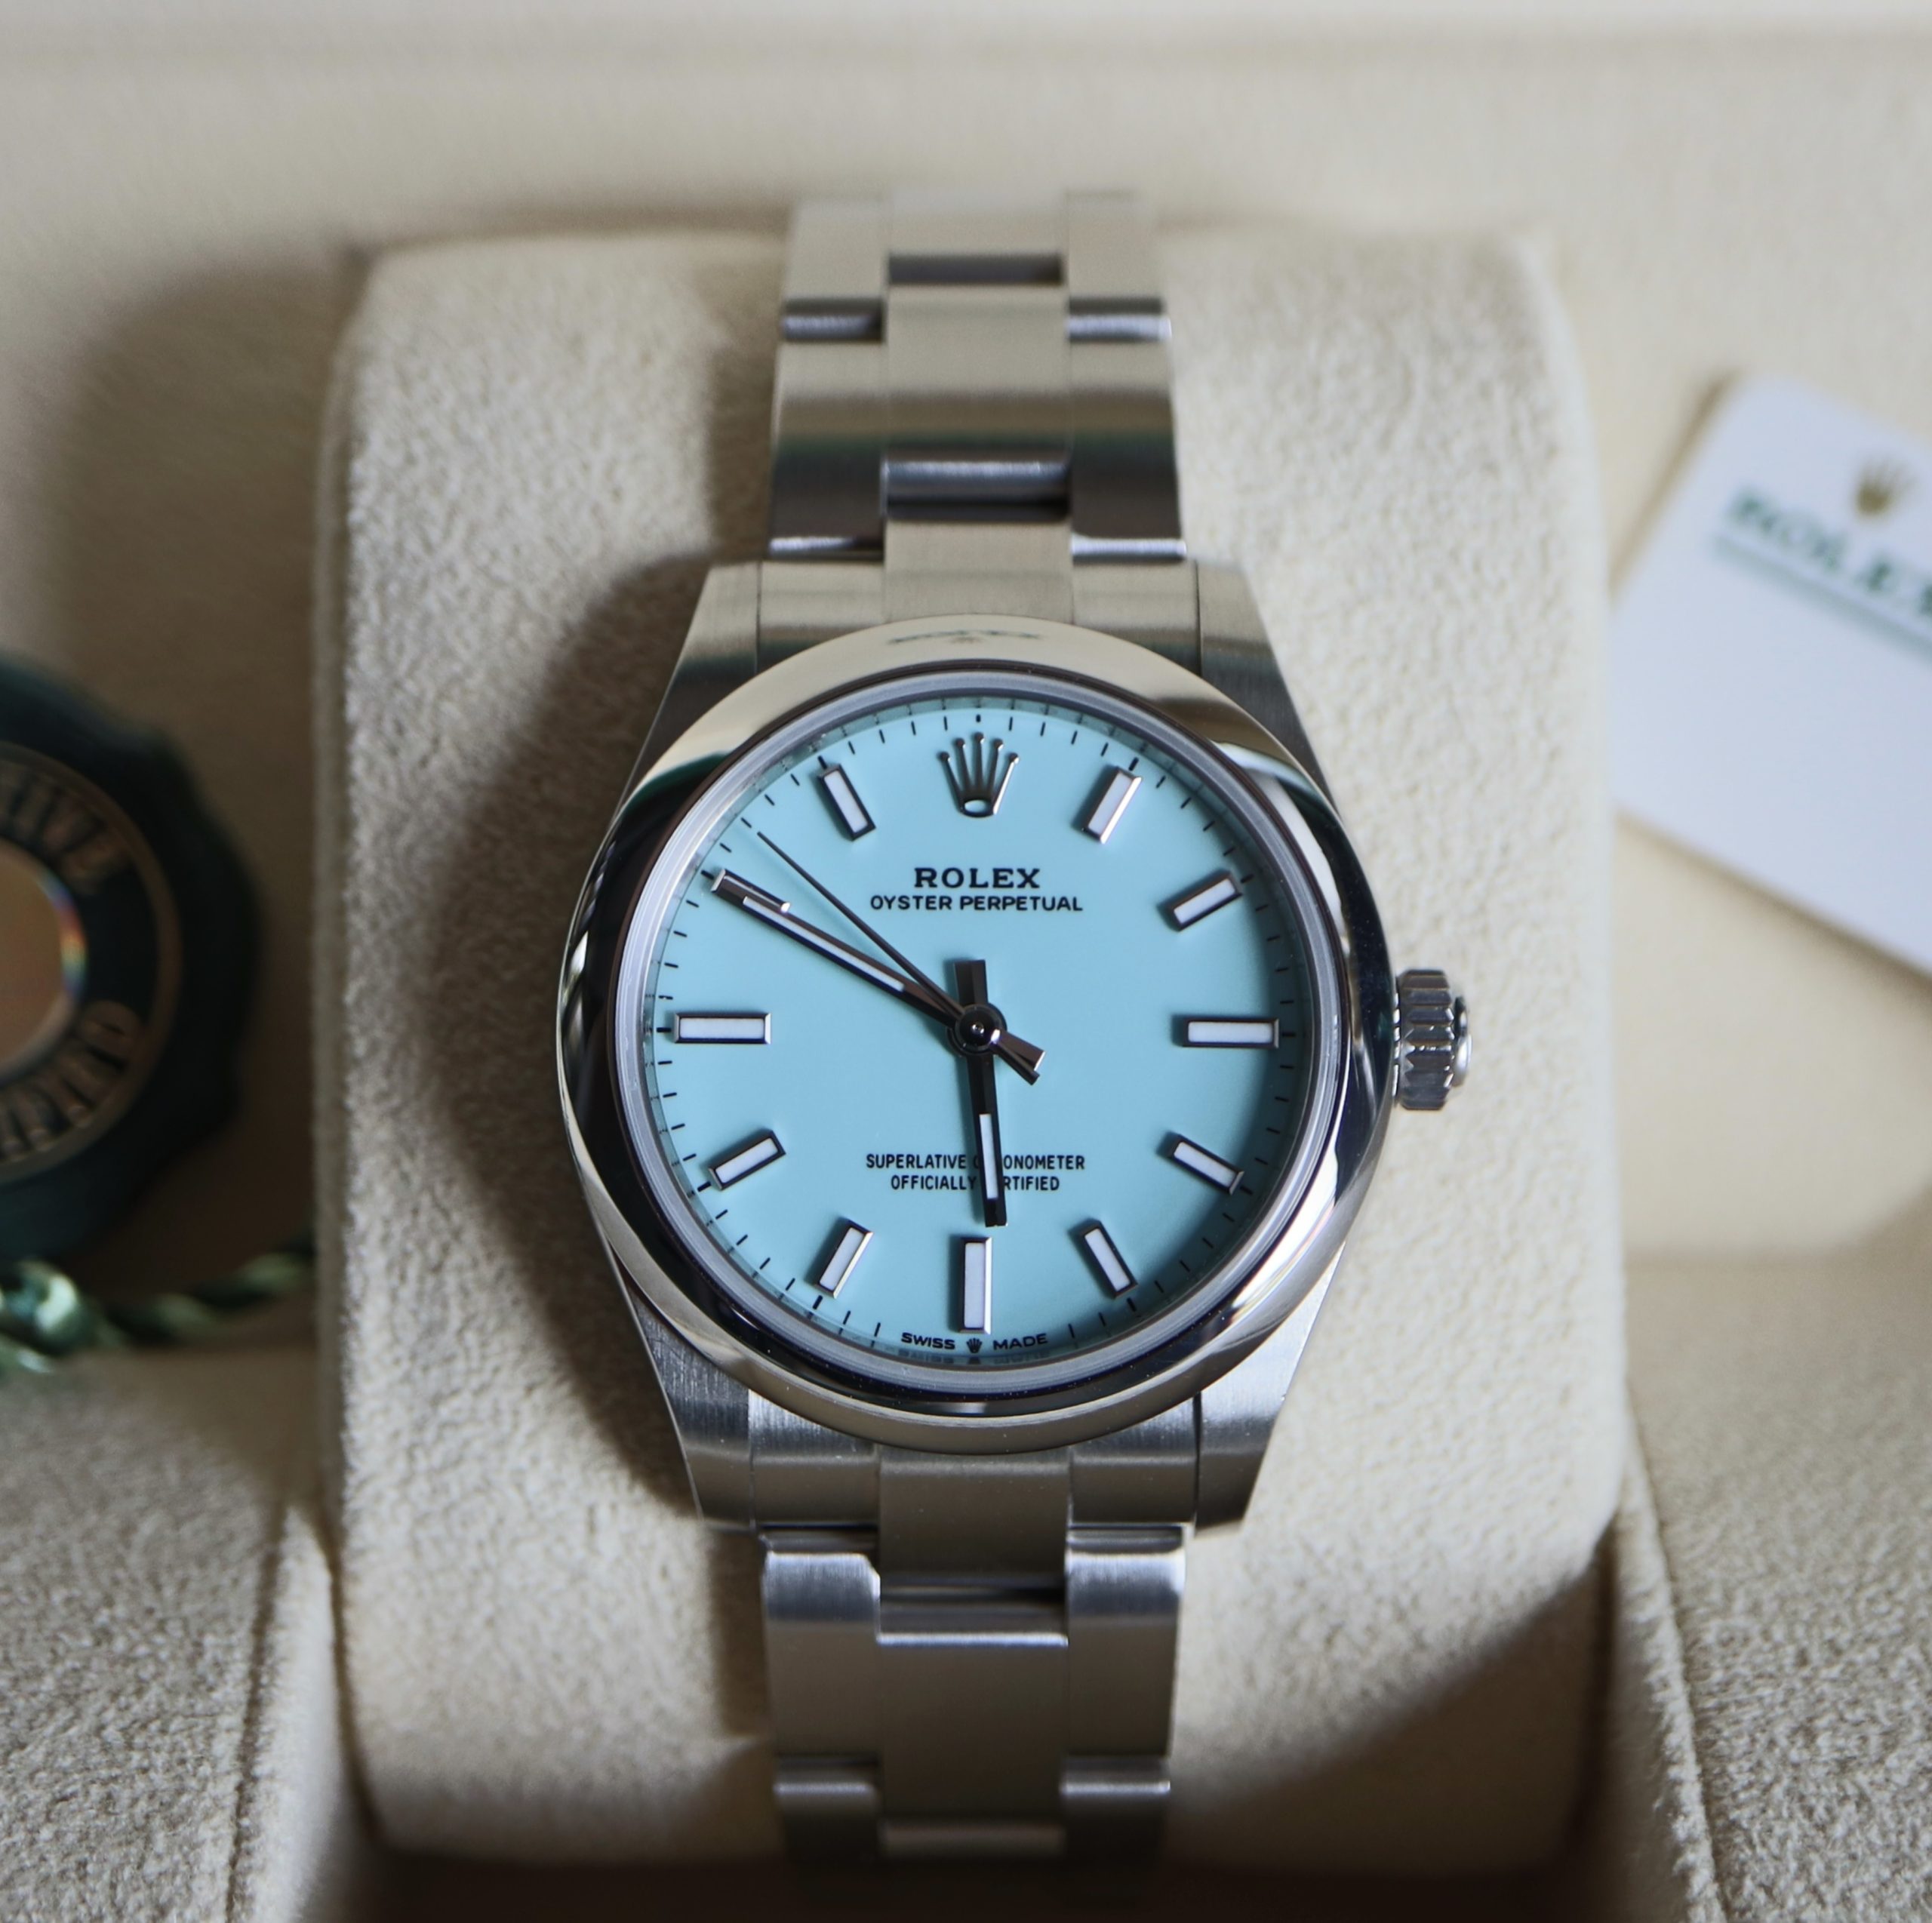 ROLEX OYSTER PERPETUAL 31 TURQUOISE DIAL 2020  Ref:277200 “WORN” (kopie)